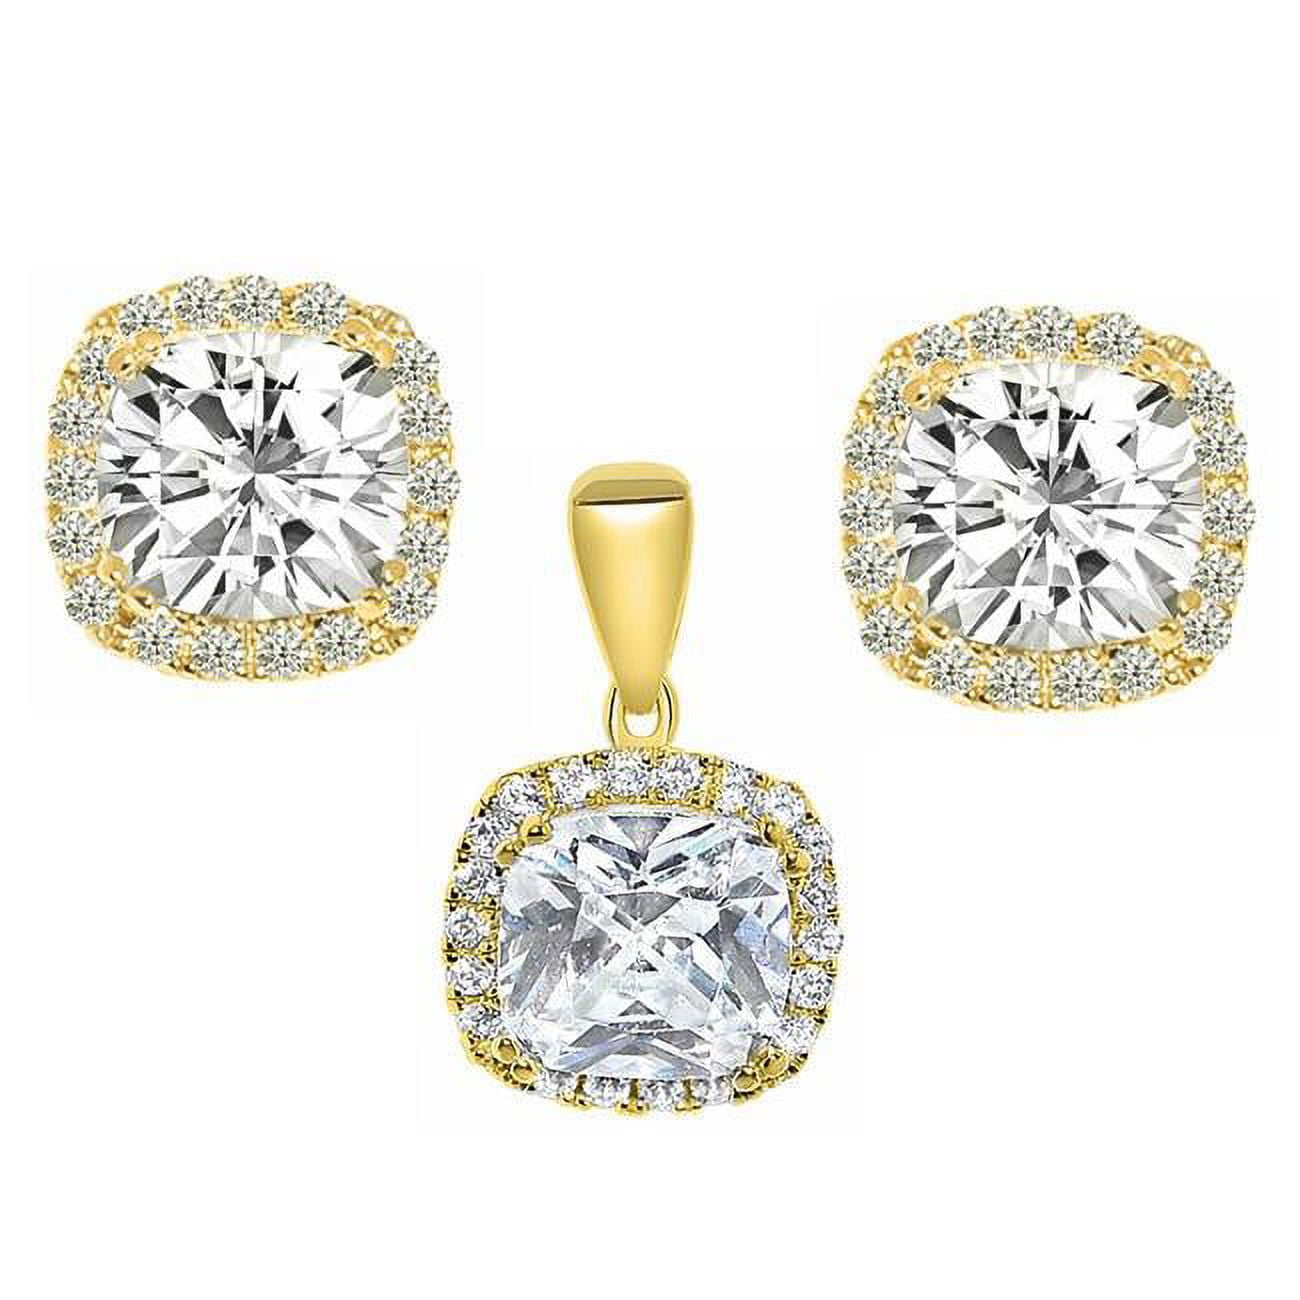 Picture of Precious Stars EP1691-2486 14K Yellow Gold Cushion-Cut Cubic Zirconia Halo Earring Pendant Set